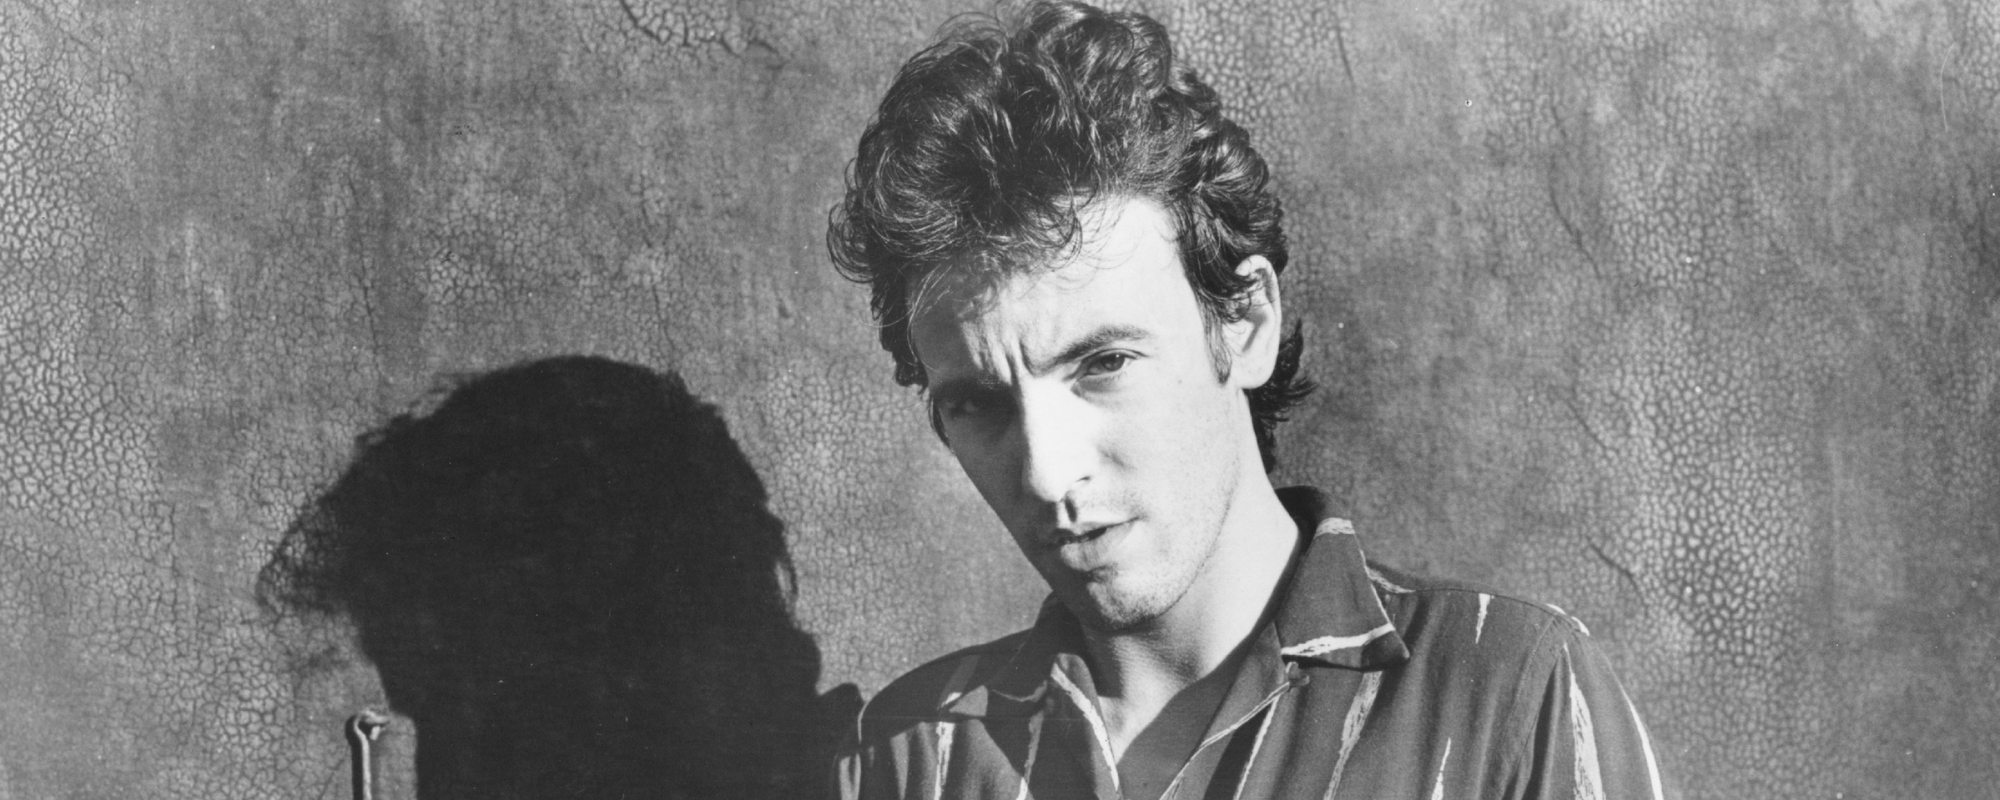 The 5 Songs in Bruce Springsteen’s Catalog with the Most Iconic Lyrics